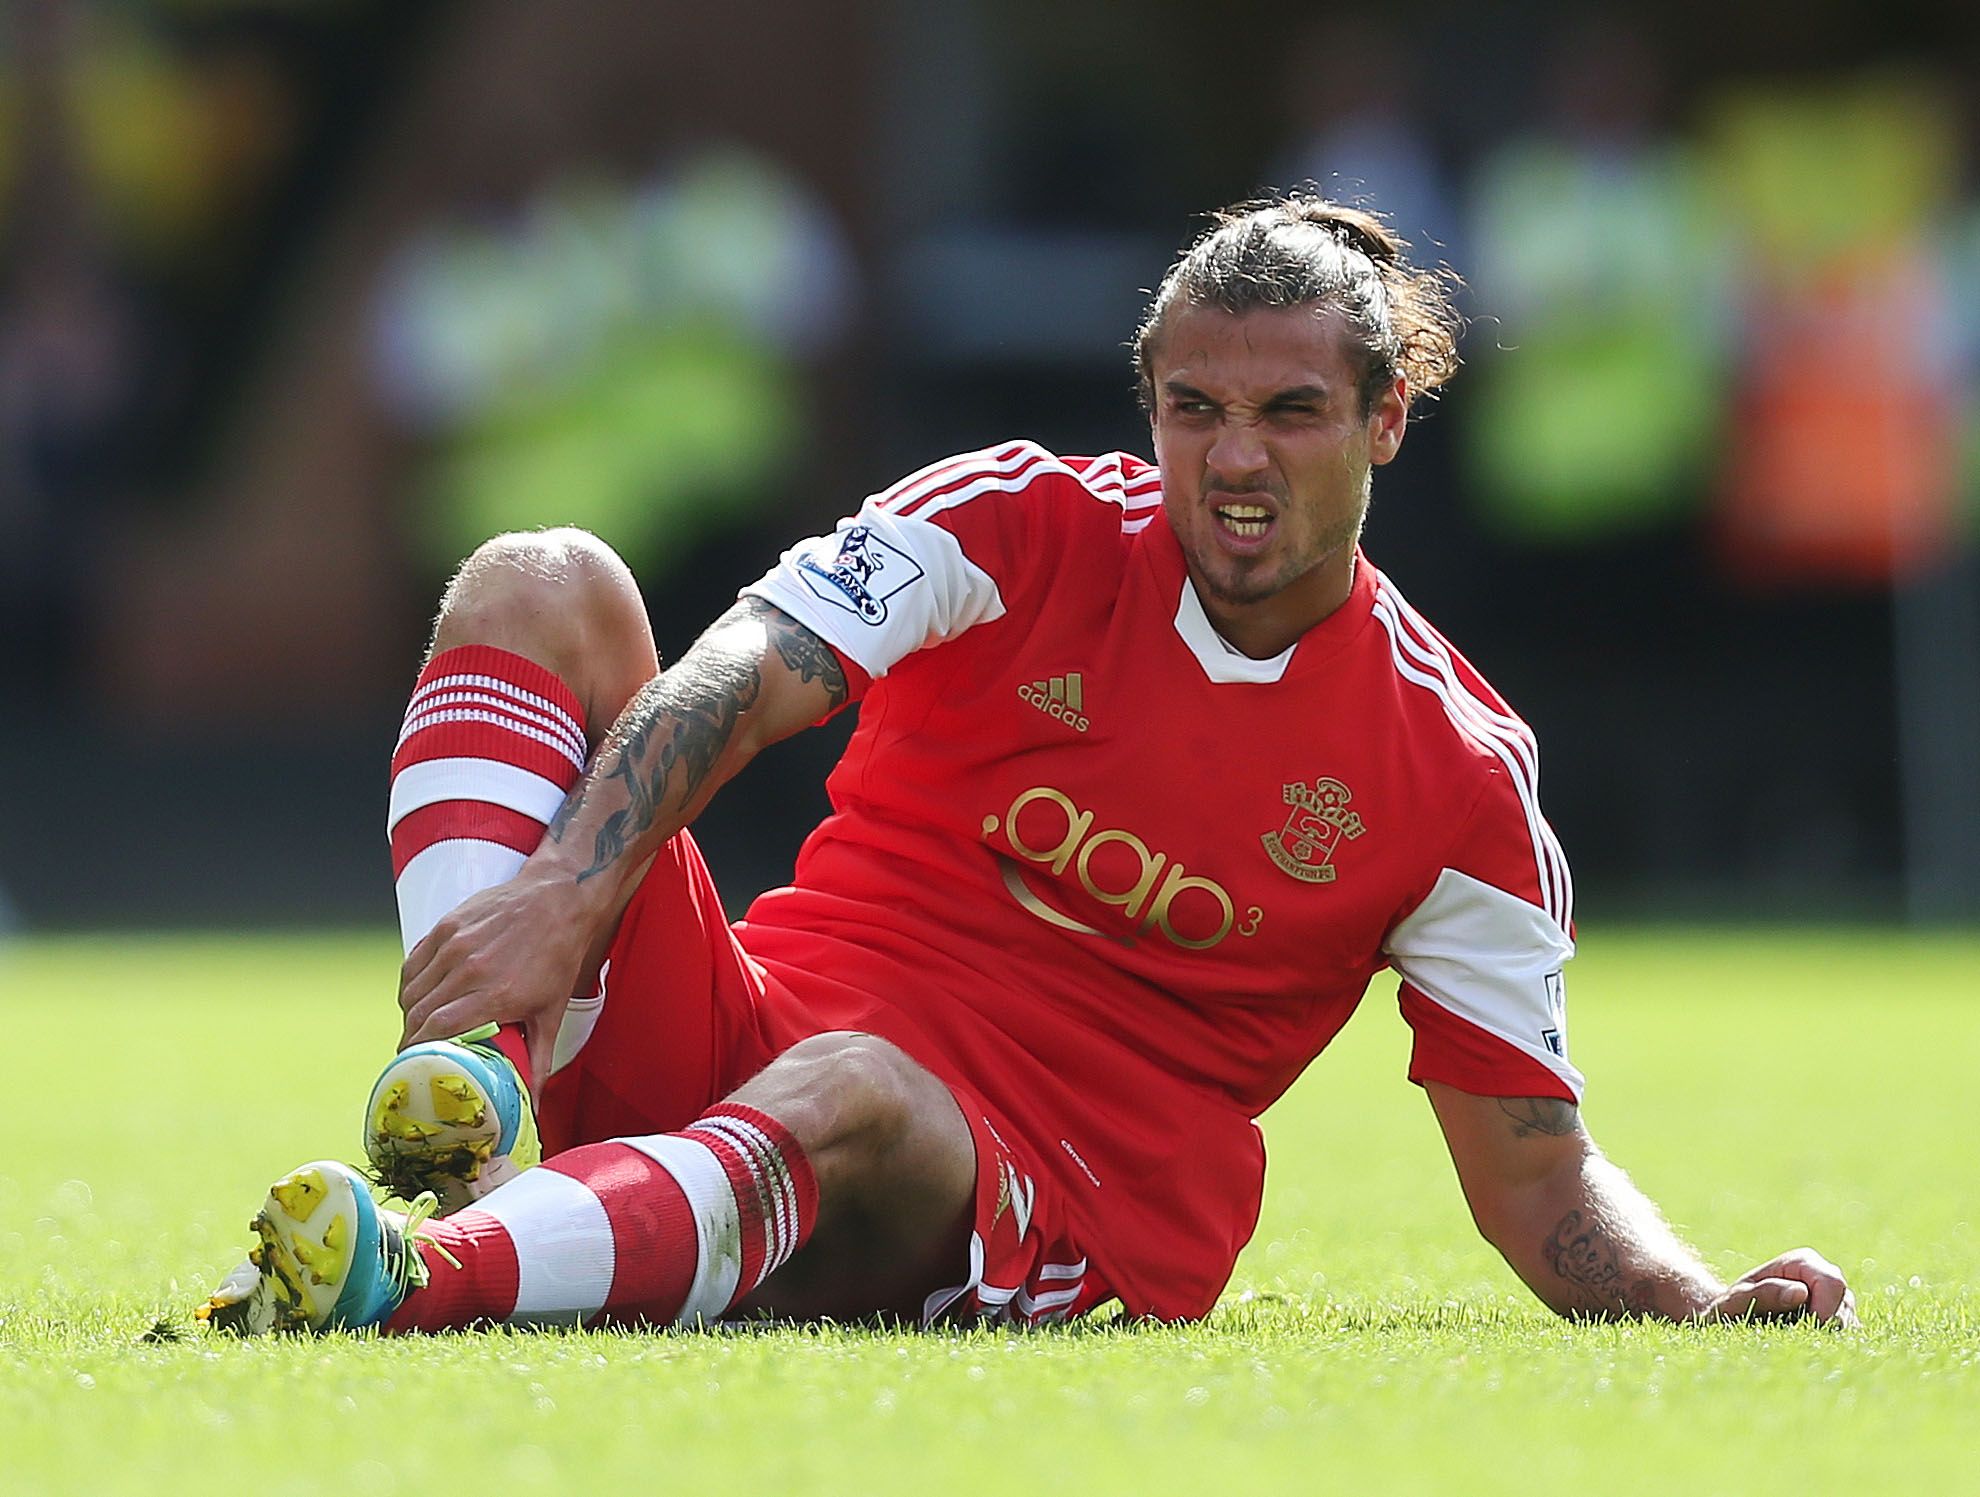 Football - Norwich City v Southampton - Barclays Premier League - Carrow Road - 31/8/13 
Southampton's Daniel Osvaldo sits on the pitch after sustaining an injury 
Mandatory Credit: Action Images / Matthew Childs 
Livepic 
EDITORIAL USE ONLY. No use with unauthorized audio, video, data, fixture lists, club/league logos or live services. Online in-match use limited to 45 images, no video emulation. No use in betting, games or single club/league/player publications.  Please contact your account re